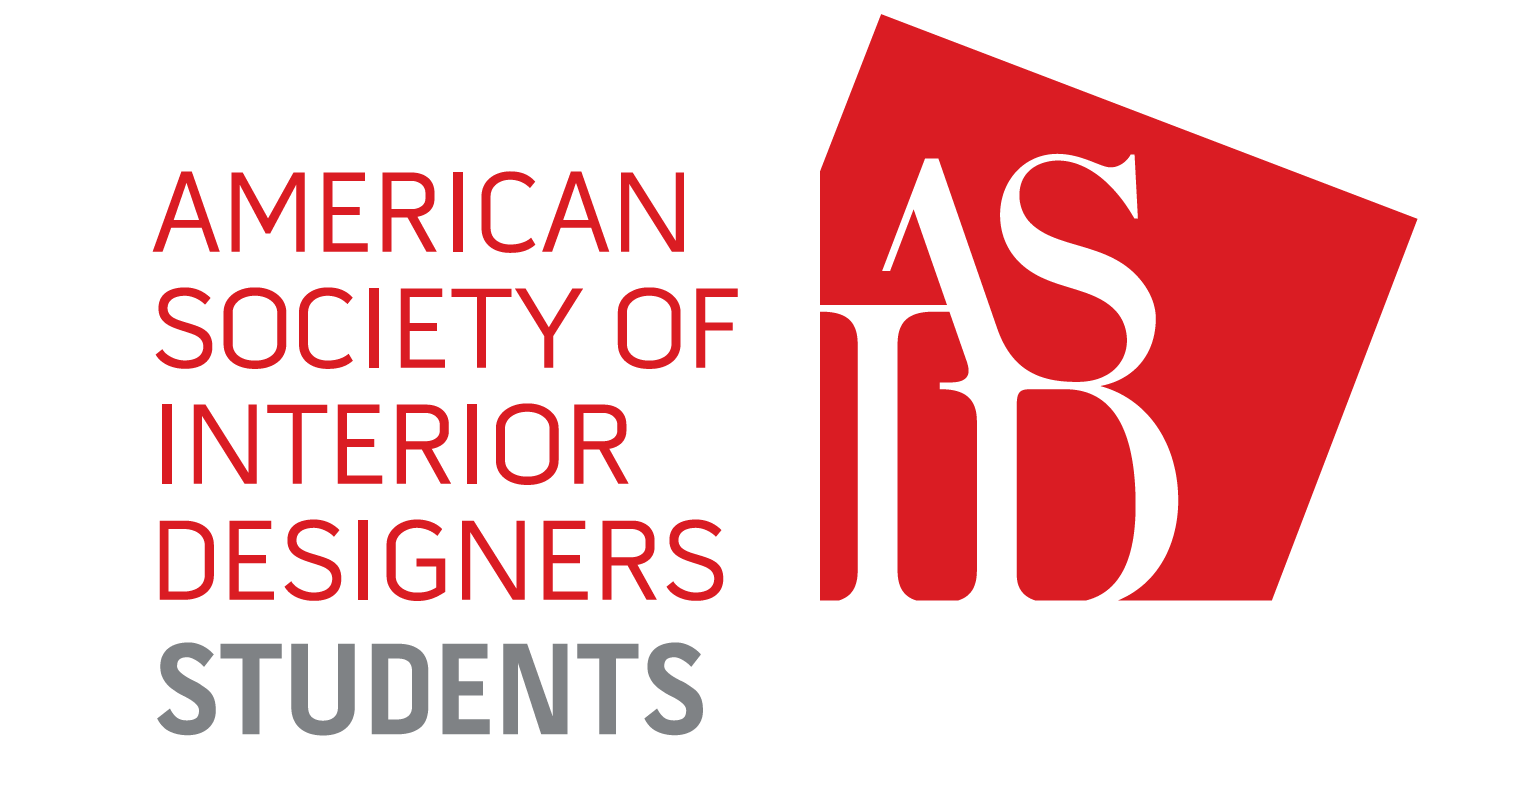 This is the logo for the American Society of Interior Designers.